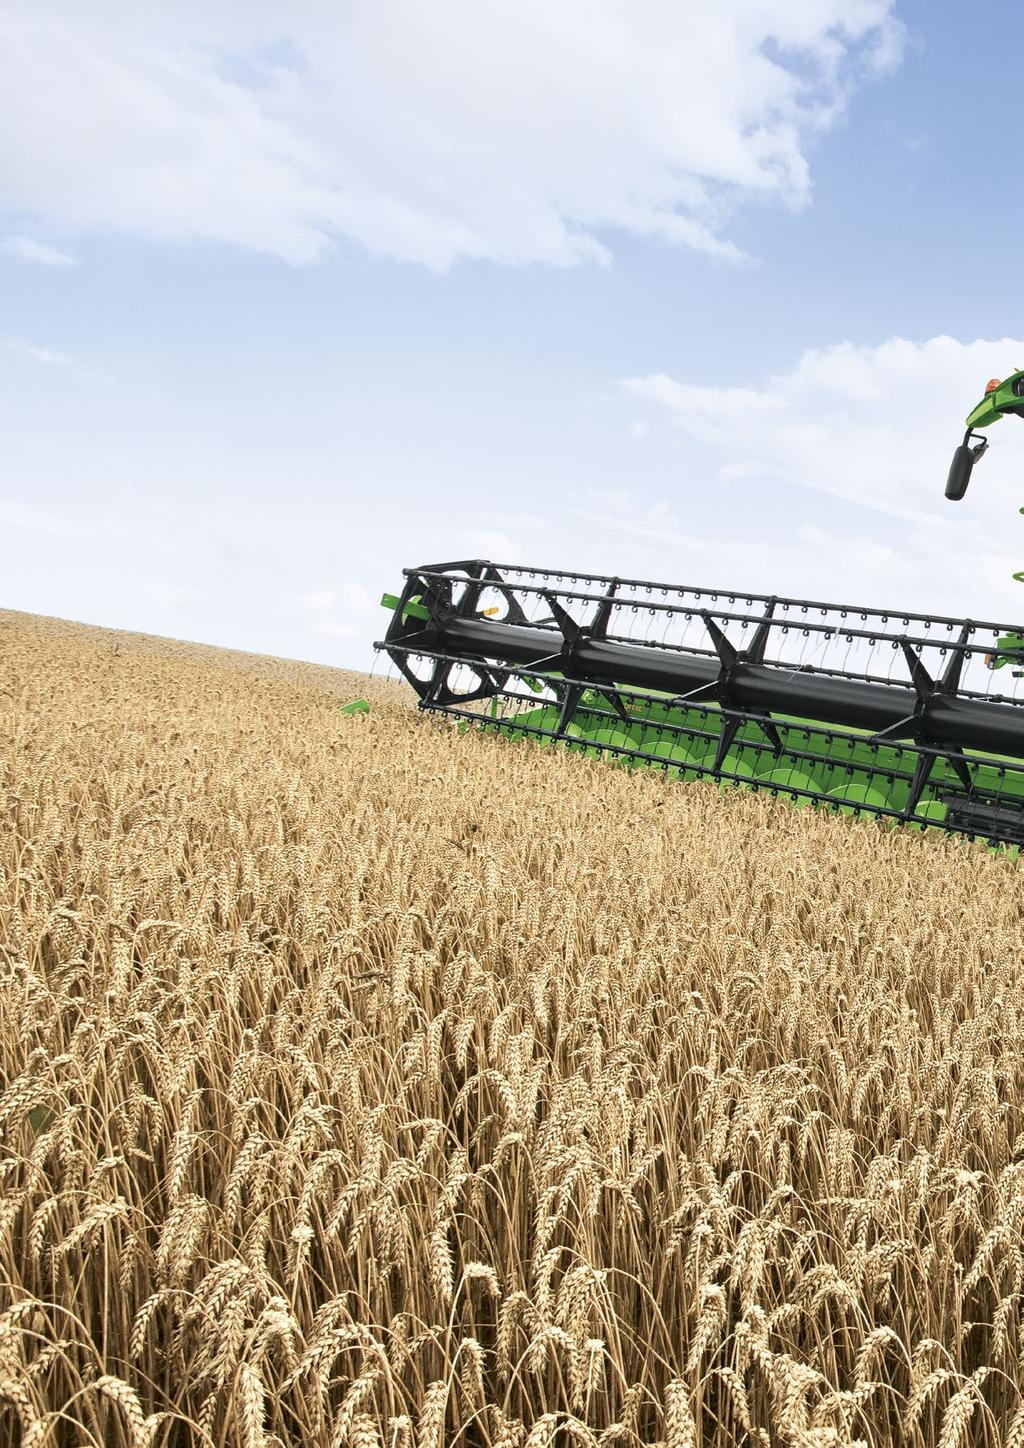 22 harvest WiThouT ComPromiSe, even on SloPeS slopes of up to 7% John Deere has created a series of simple solutions aimed at avoiding cleaning shoe